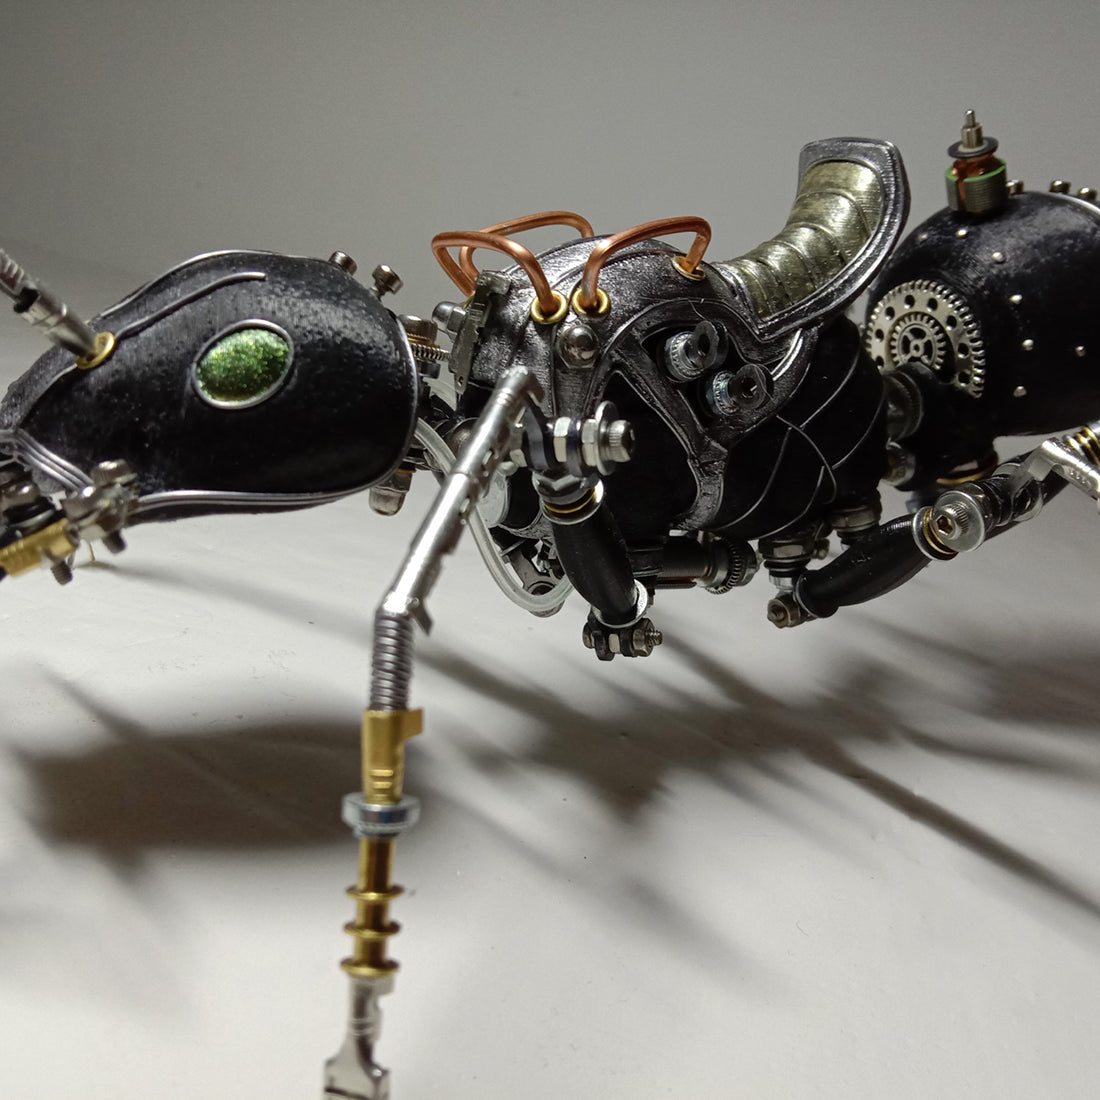 Steampunk Worker Ant with Saddle 3D Metal Model Kits Assembled Insect Sculpture  Assembly